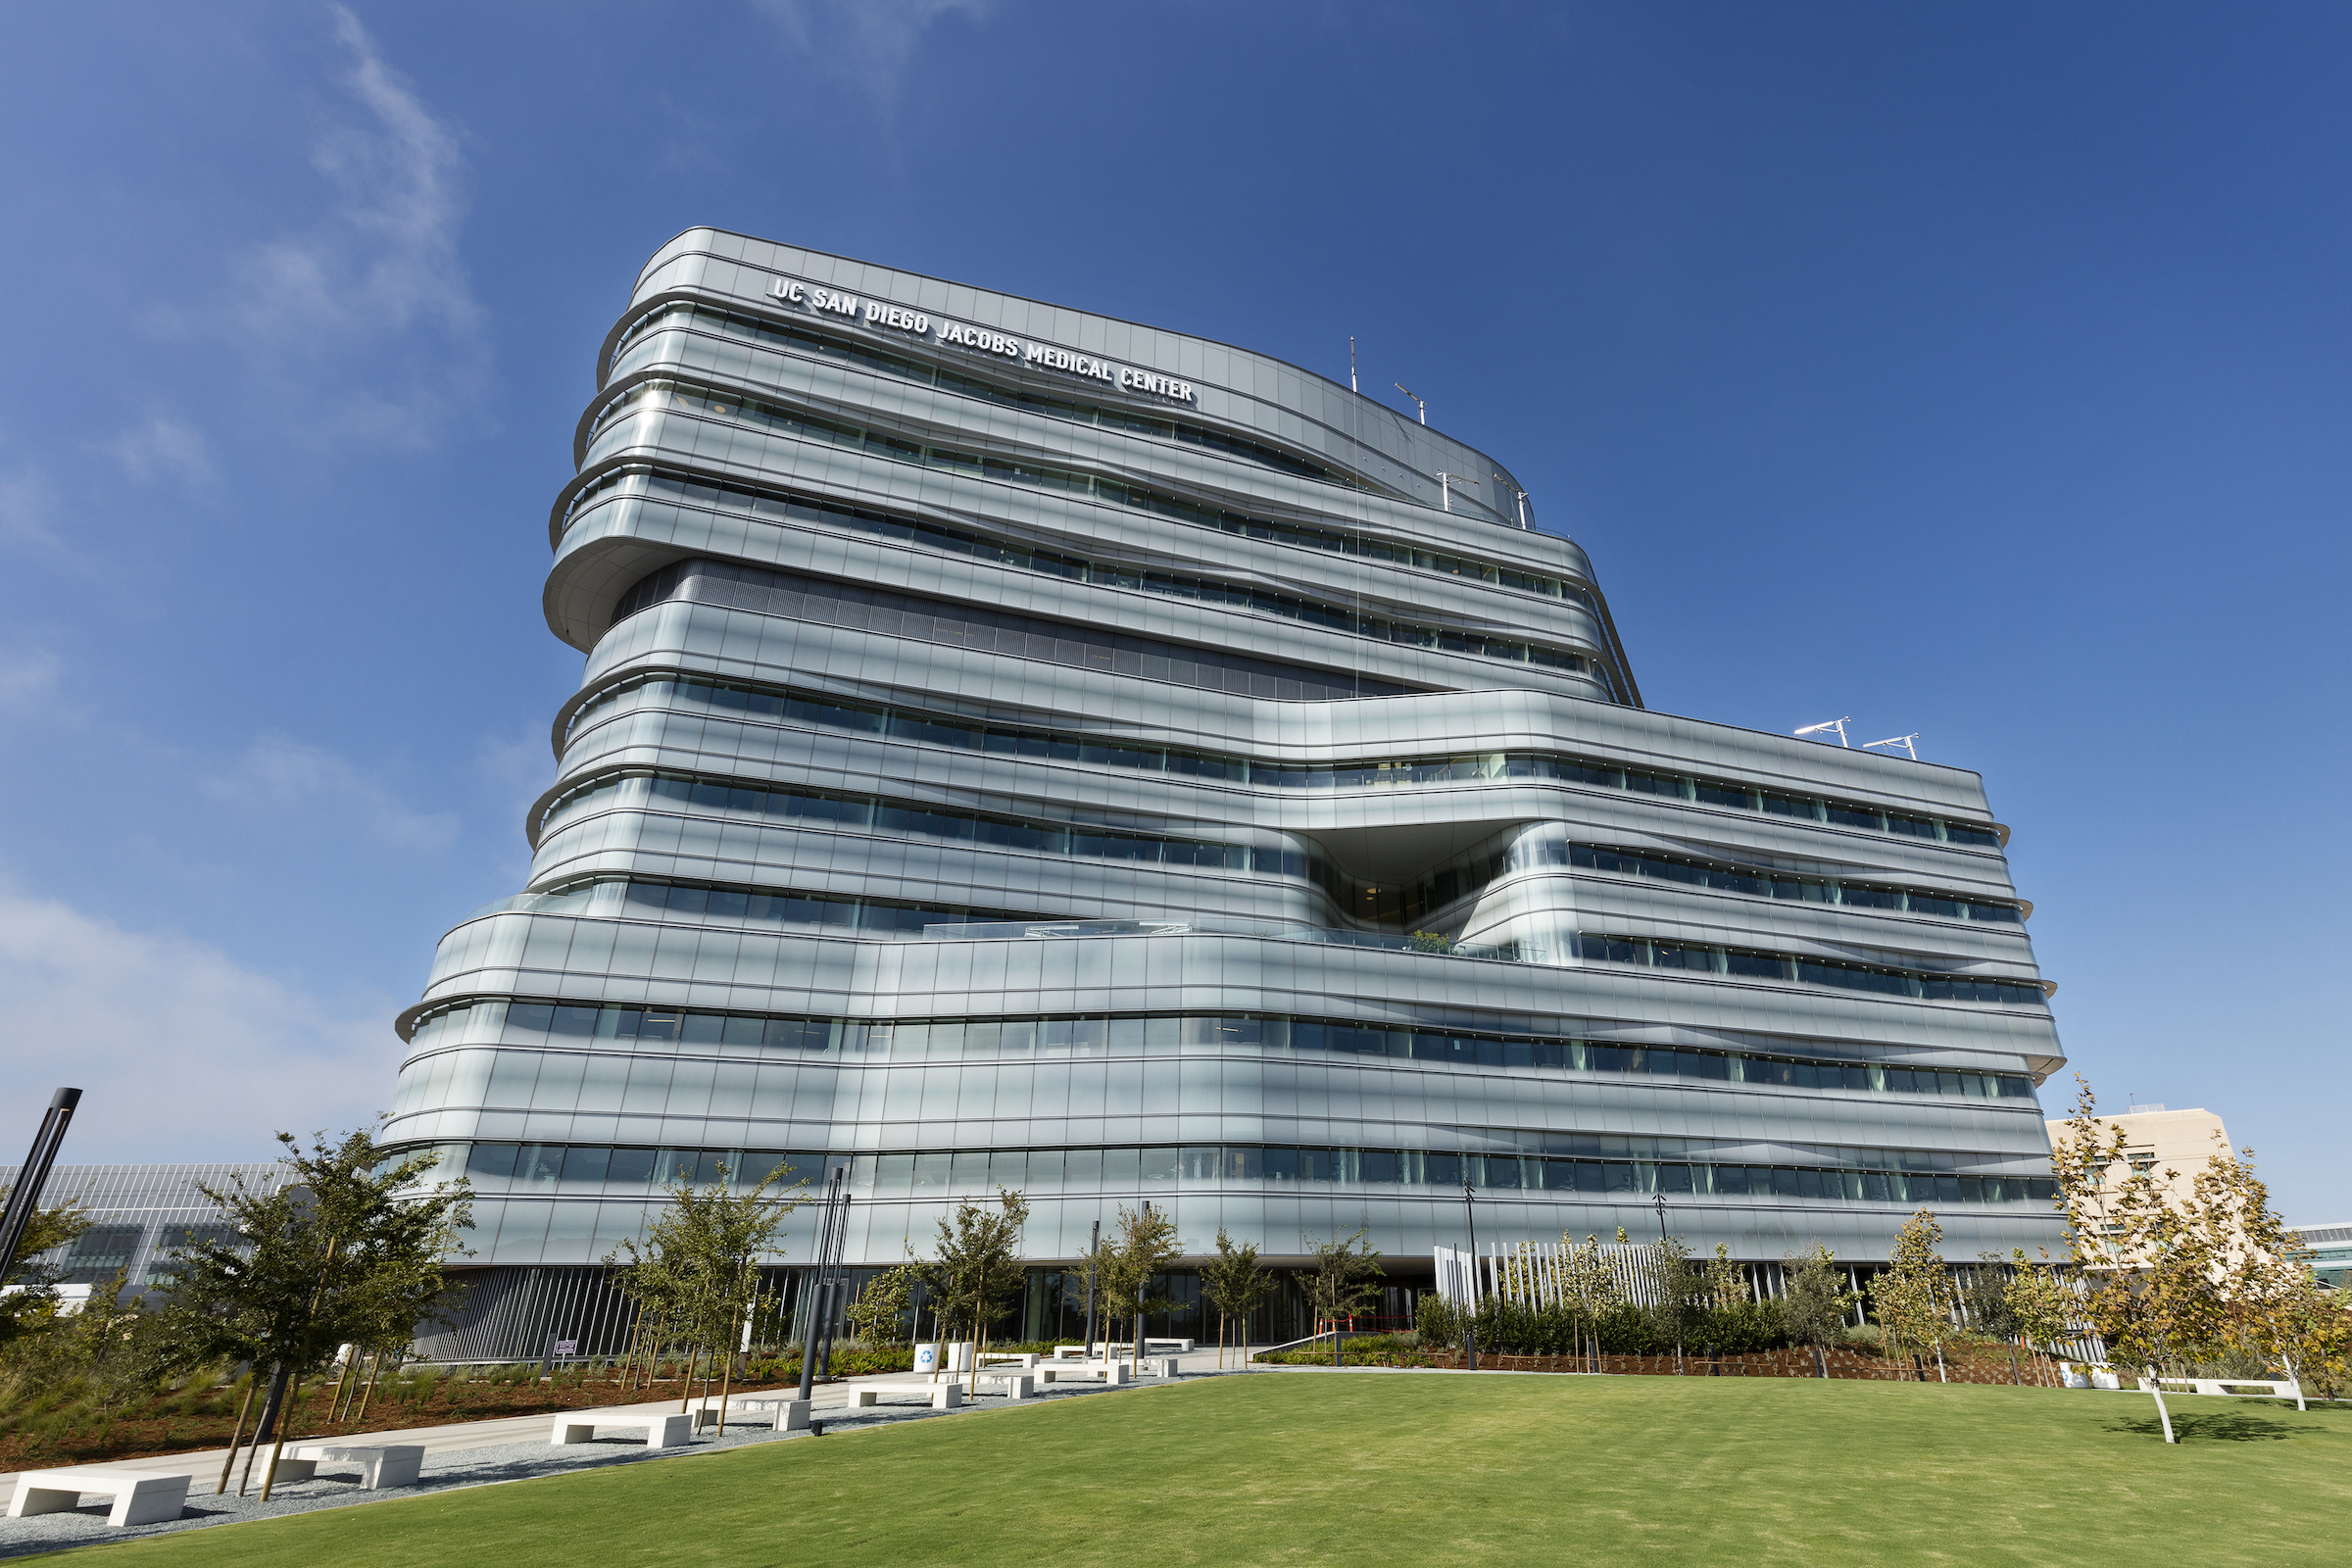 The Jacobs Medical Center resulted from $100 million in gifts from Joan and Irwin Jacobs. (Photo: UC San Diego Health)